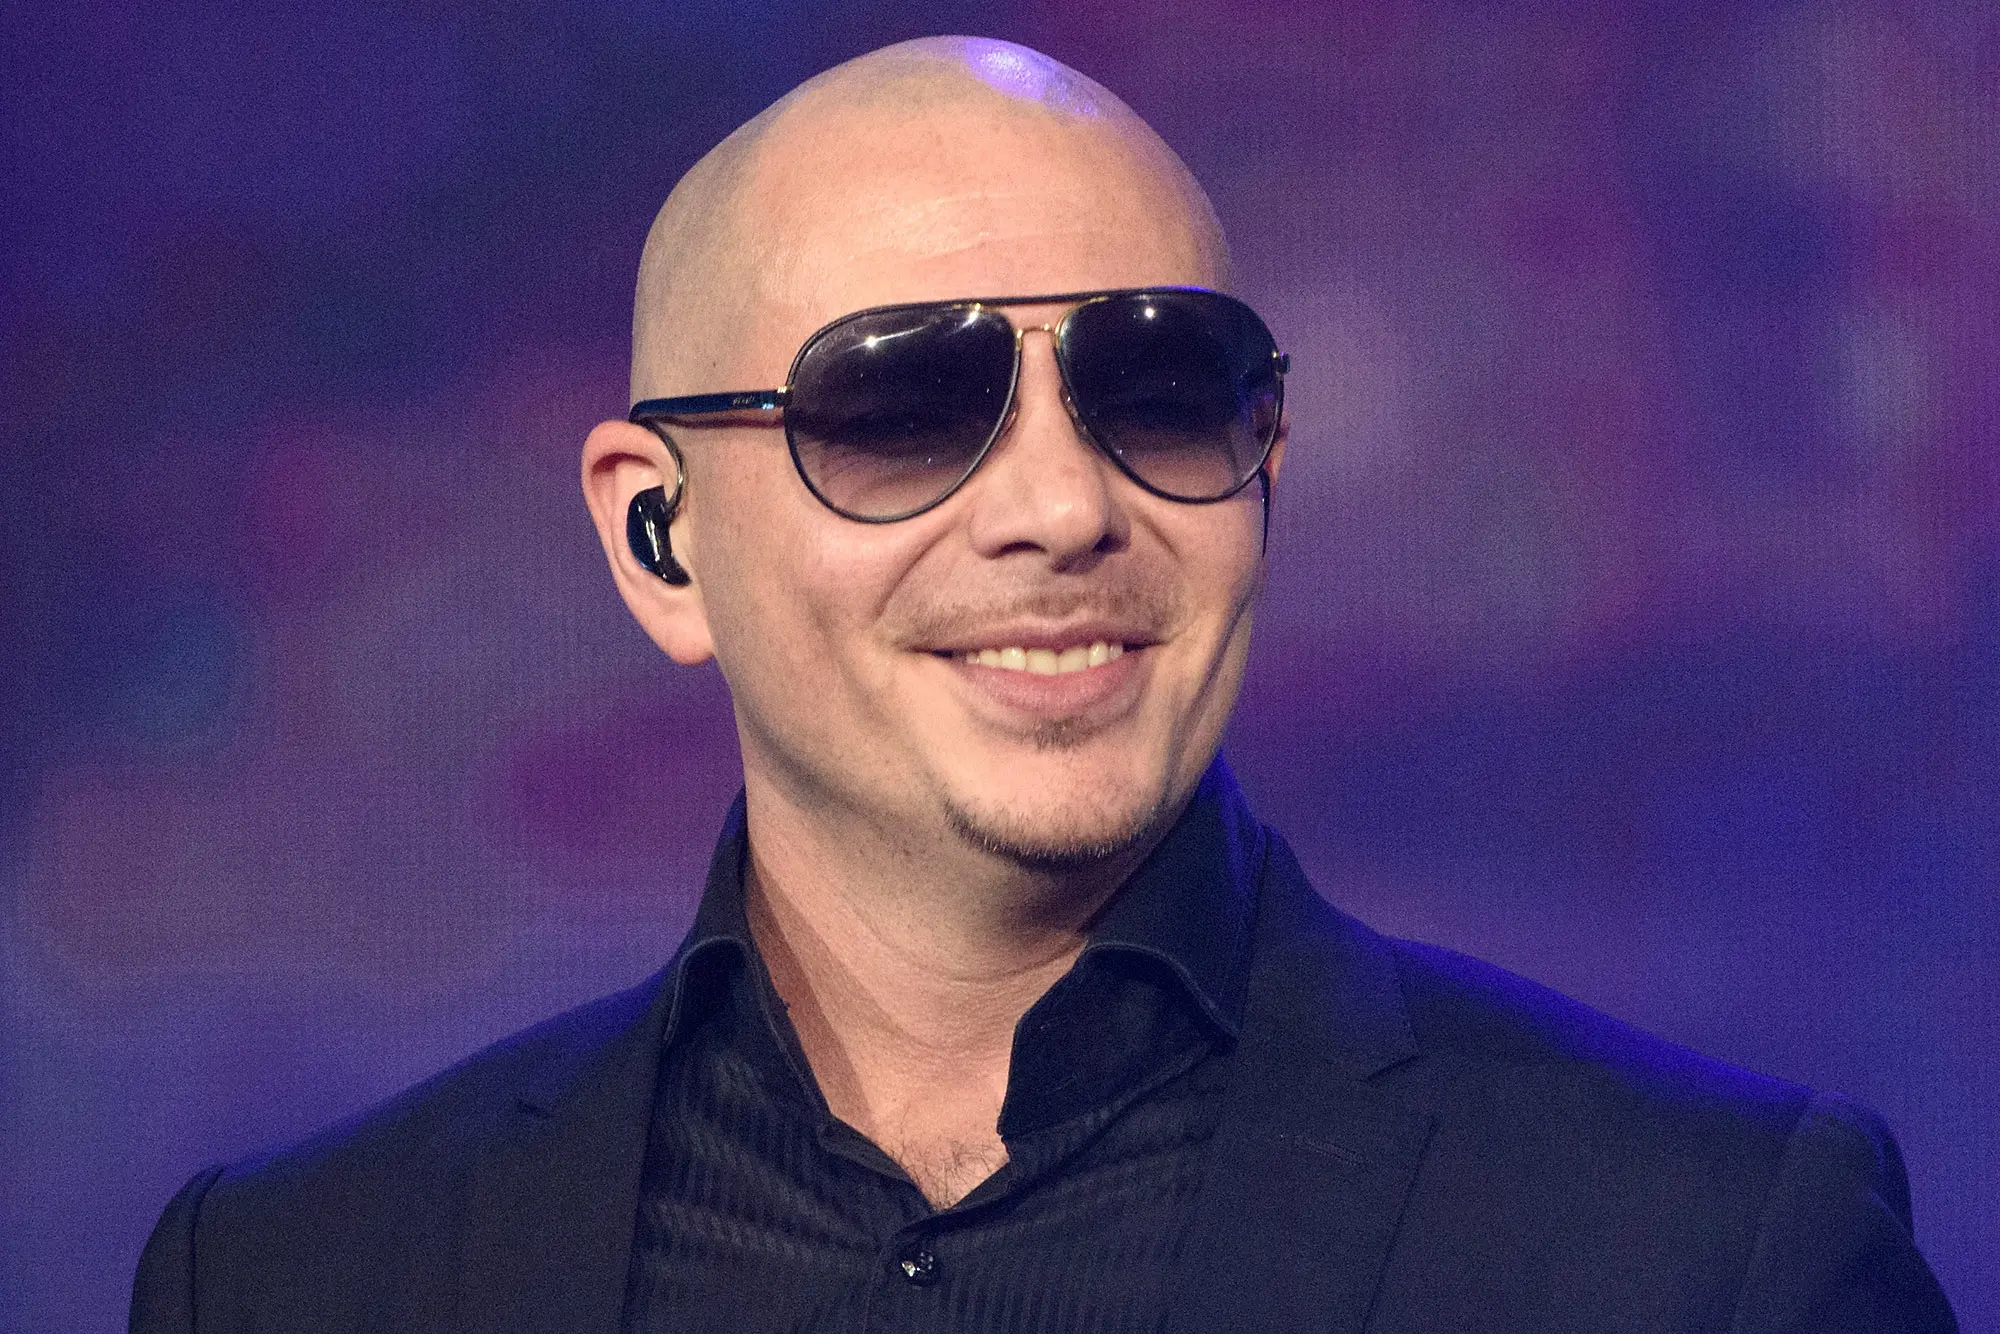 Pitbull with glasses on